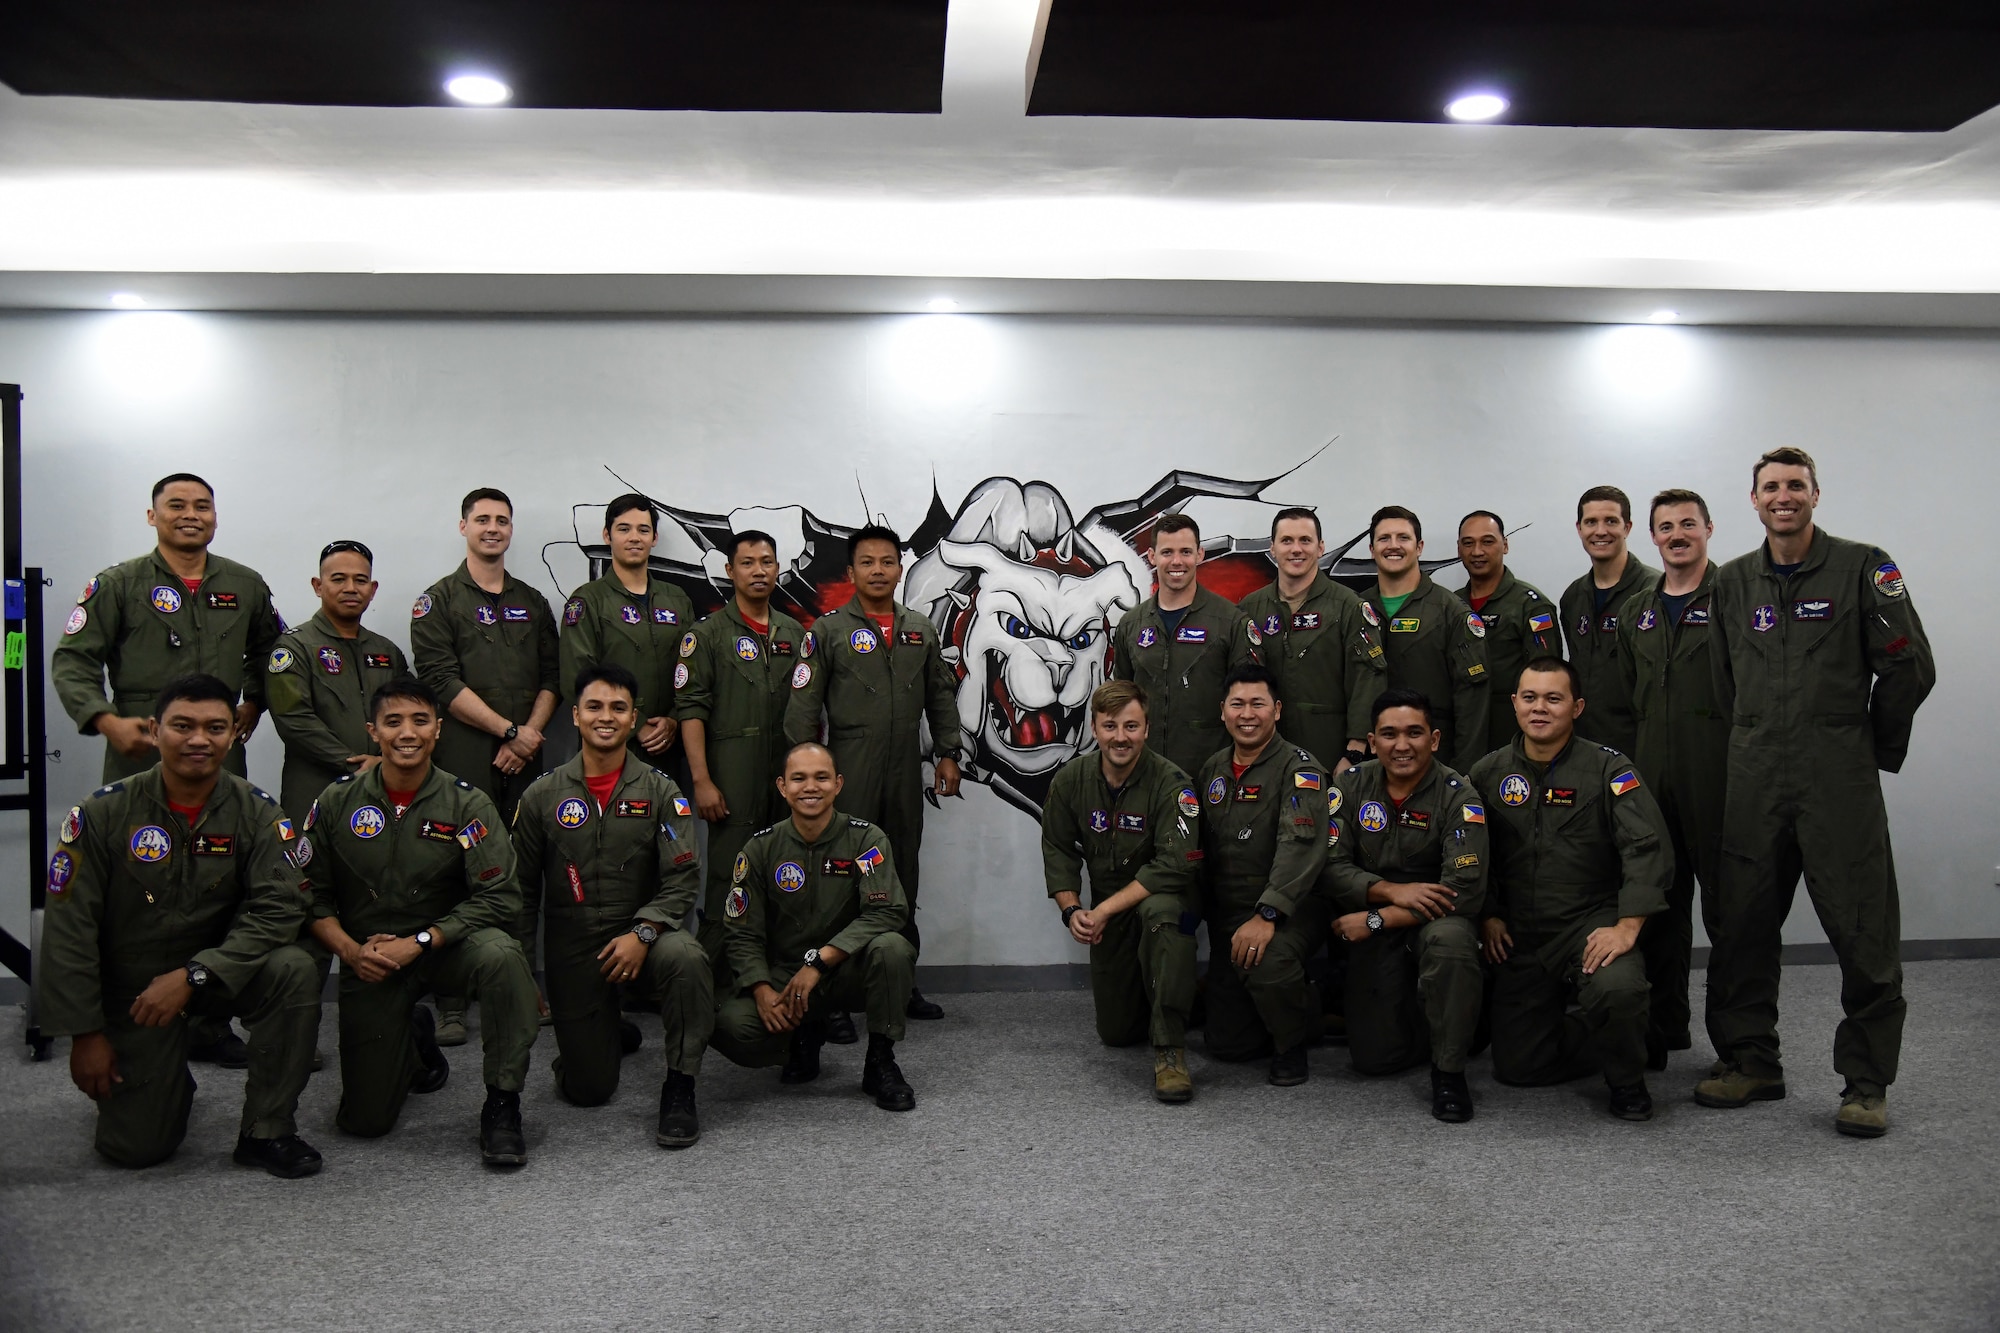 U.S. Air Force F-16 Fighting Falcon pilots pose alongside Philippine Air Force FA-50 pilots during the Bilateral Air Contingent Exchange-Philippines (BACE-P) at Cesar Basa Air Base, Philippines, Feb. 1, 2019.